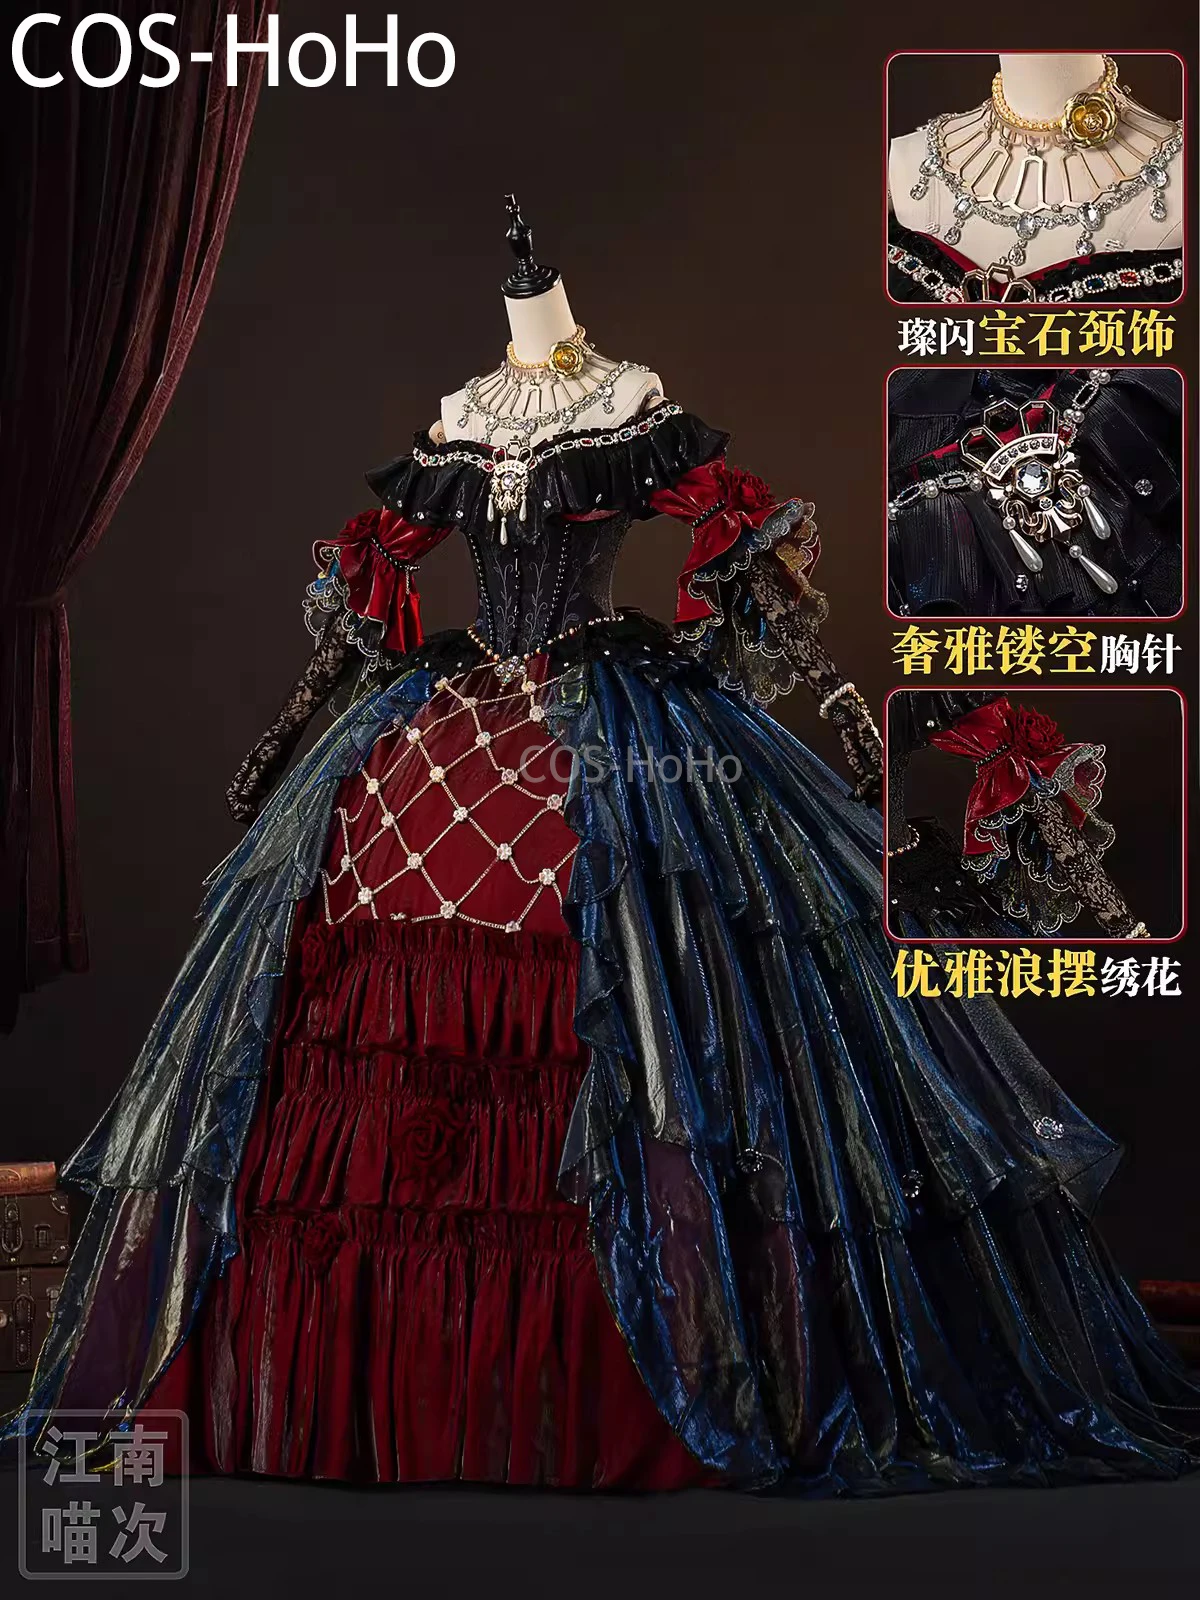 

COS-HoHo Identity V Marie Bloody Queen Game Suit Gorgeous Dress Uniform Cosplay Costume Halloween Party Role Play Outfit Women